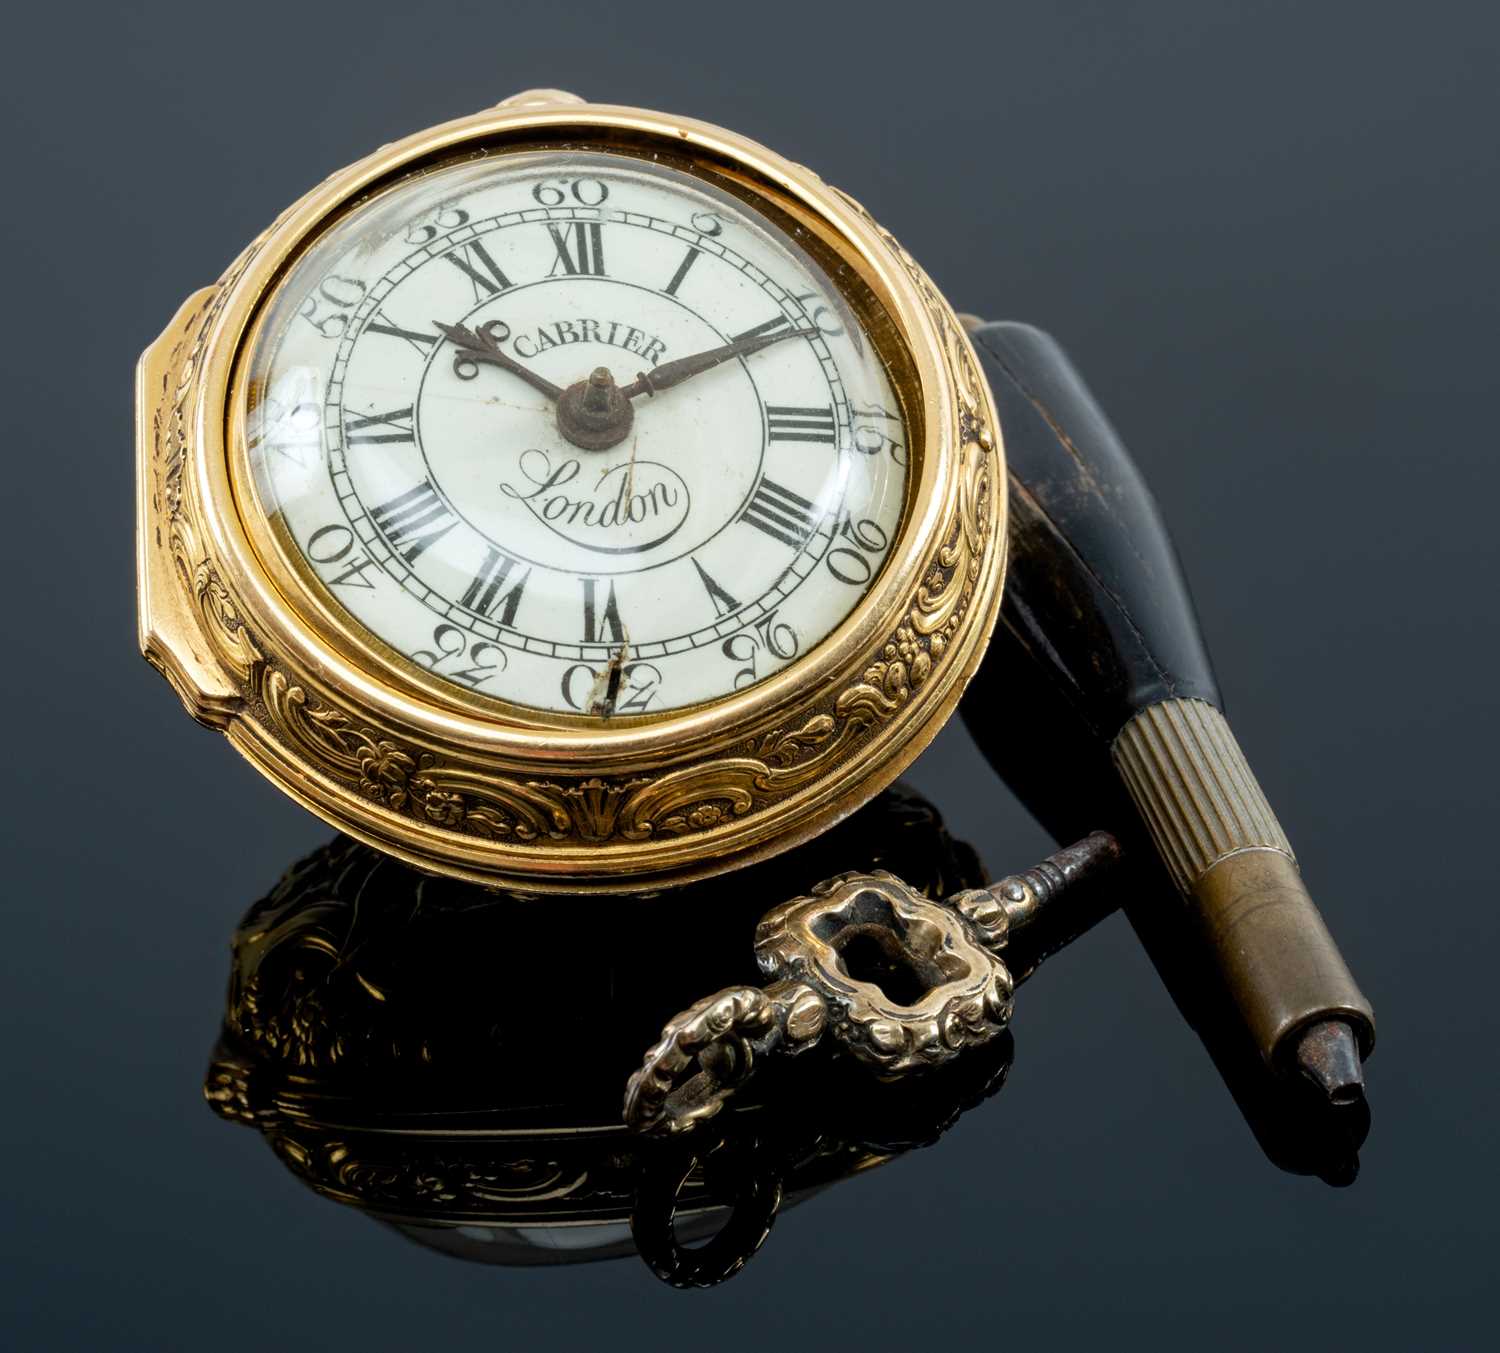 MID-18TH C. GOLD PAIR CASED POCKET WATCH, Charles Cabrier, London 1750, with white enamel dial,